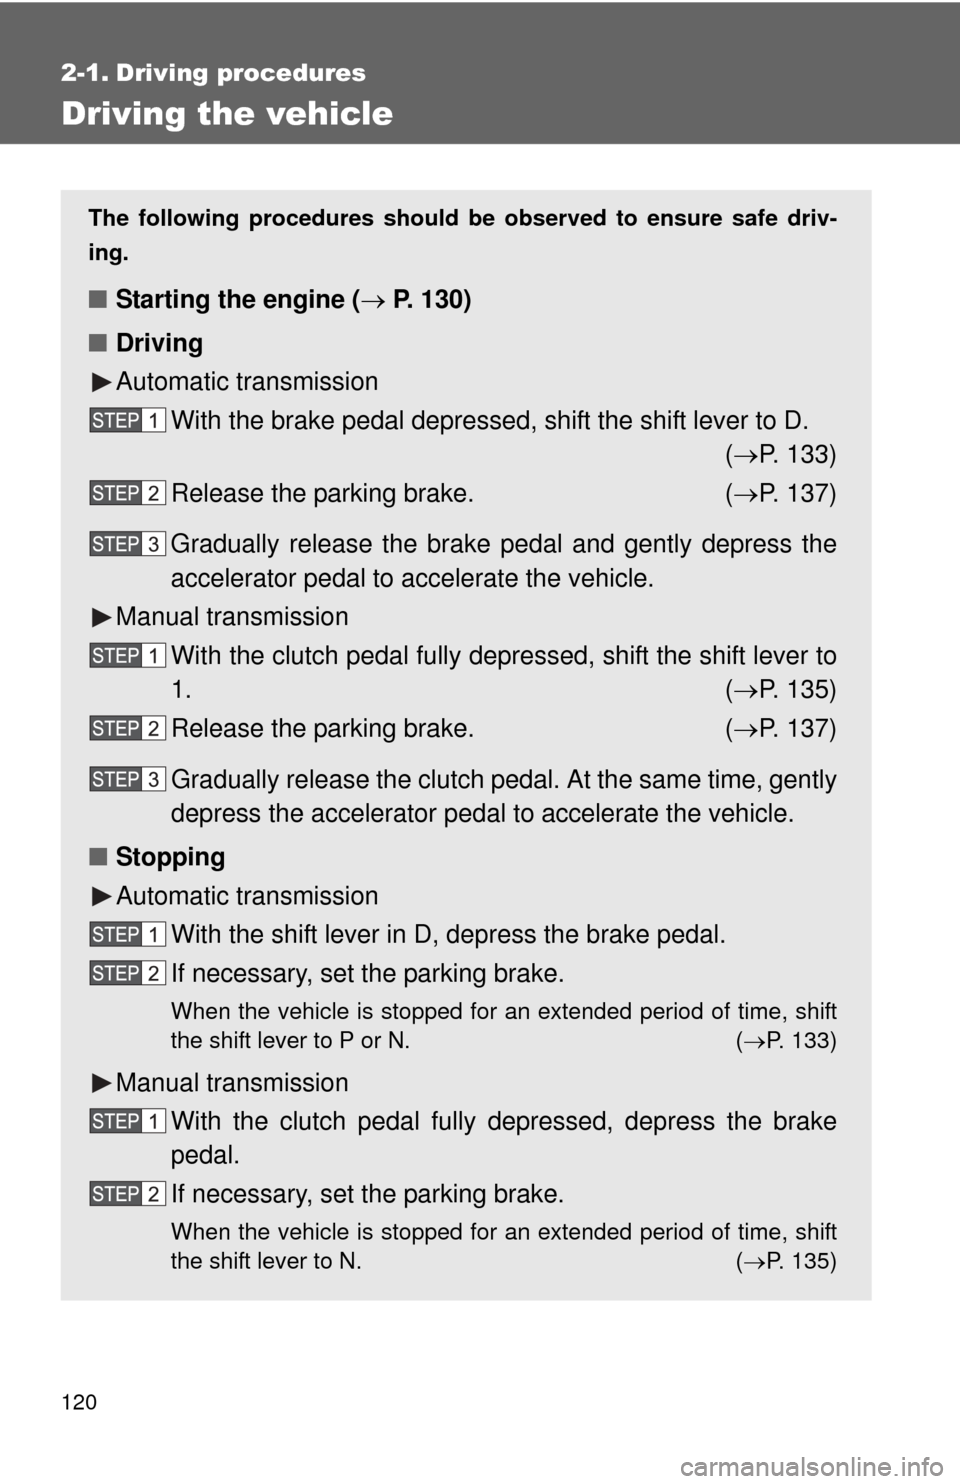 TOYOTA YARIS 2011 3.G Owners Manual 120
2-1. Driving procedures
Driving the vehicle
The following procedures should be observed to ensure safe driv-
ing.
■ Starting the engine (  P. 130)
■ Driving
Automatic transmission
With the 